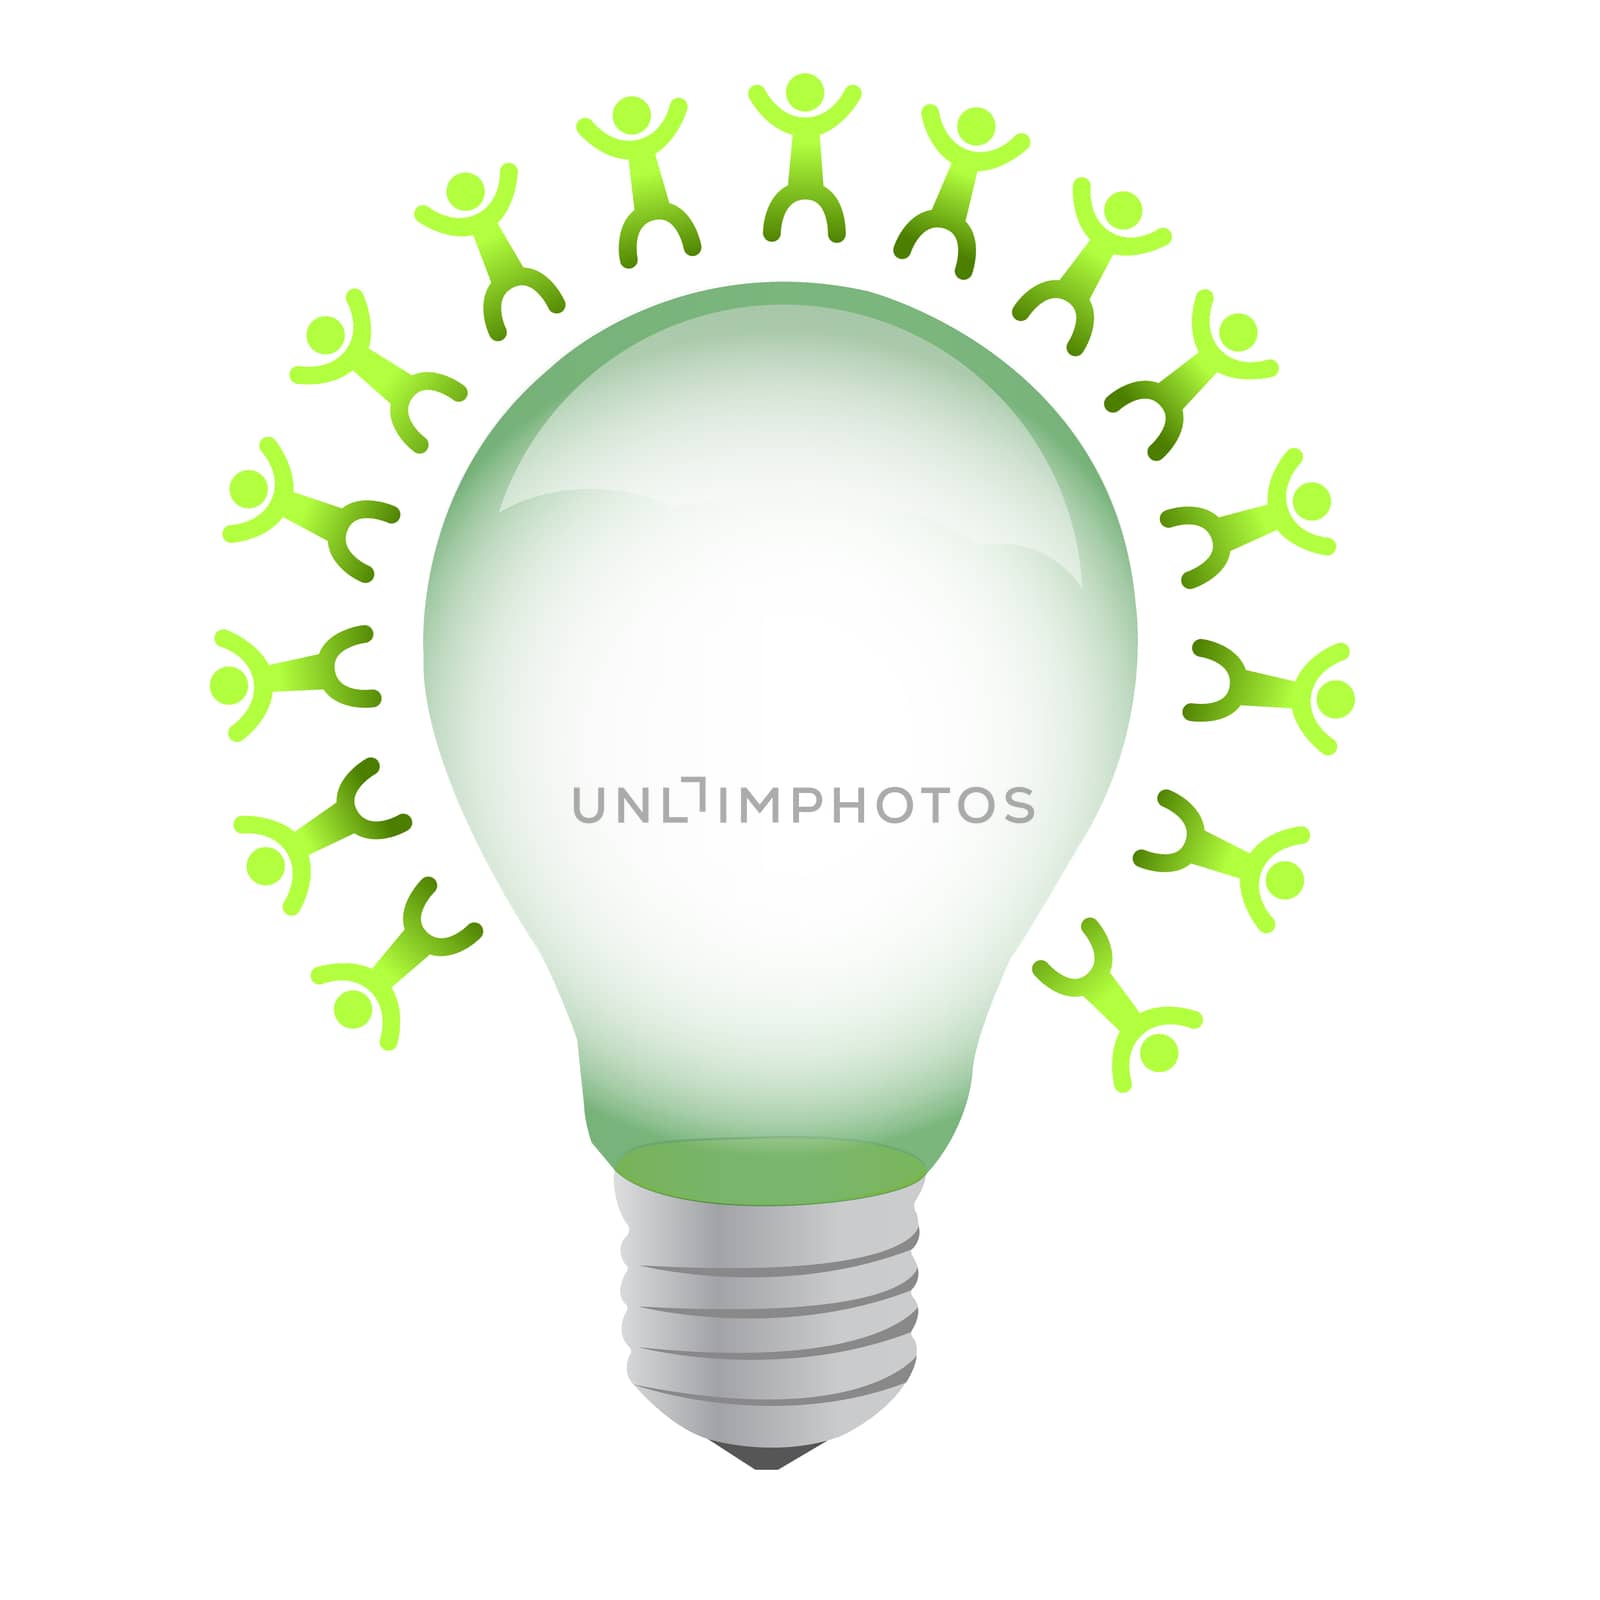 small people around a bulb. on white background.